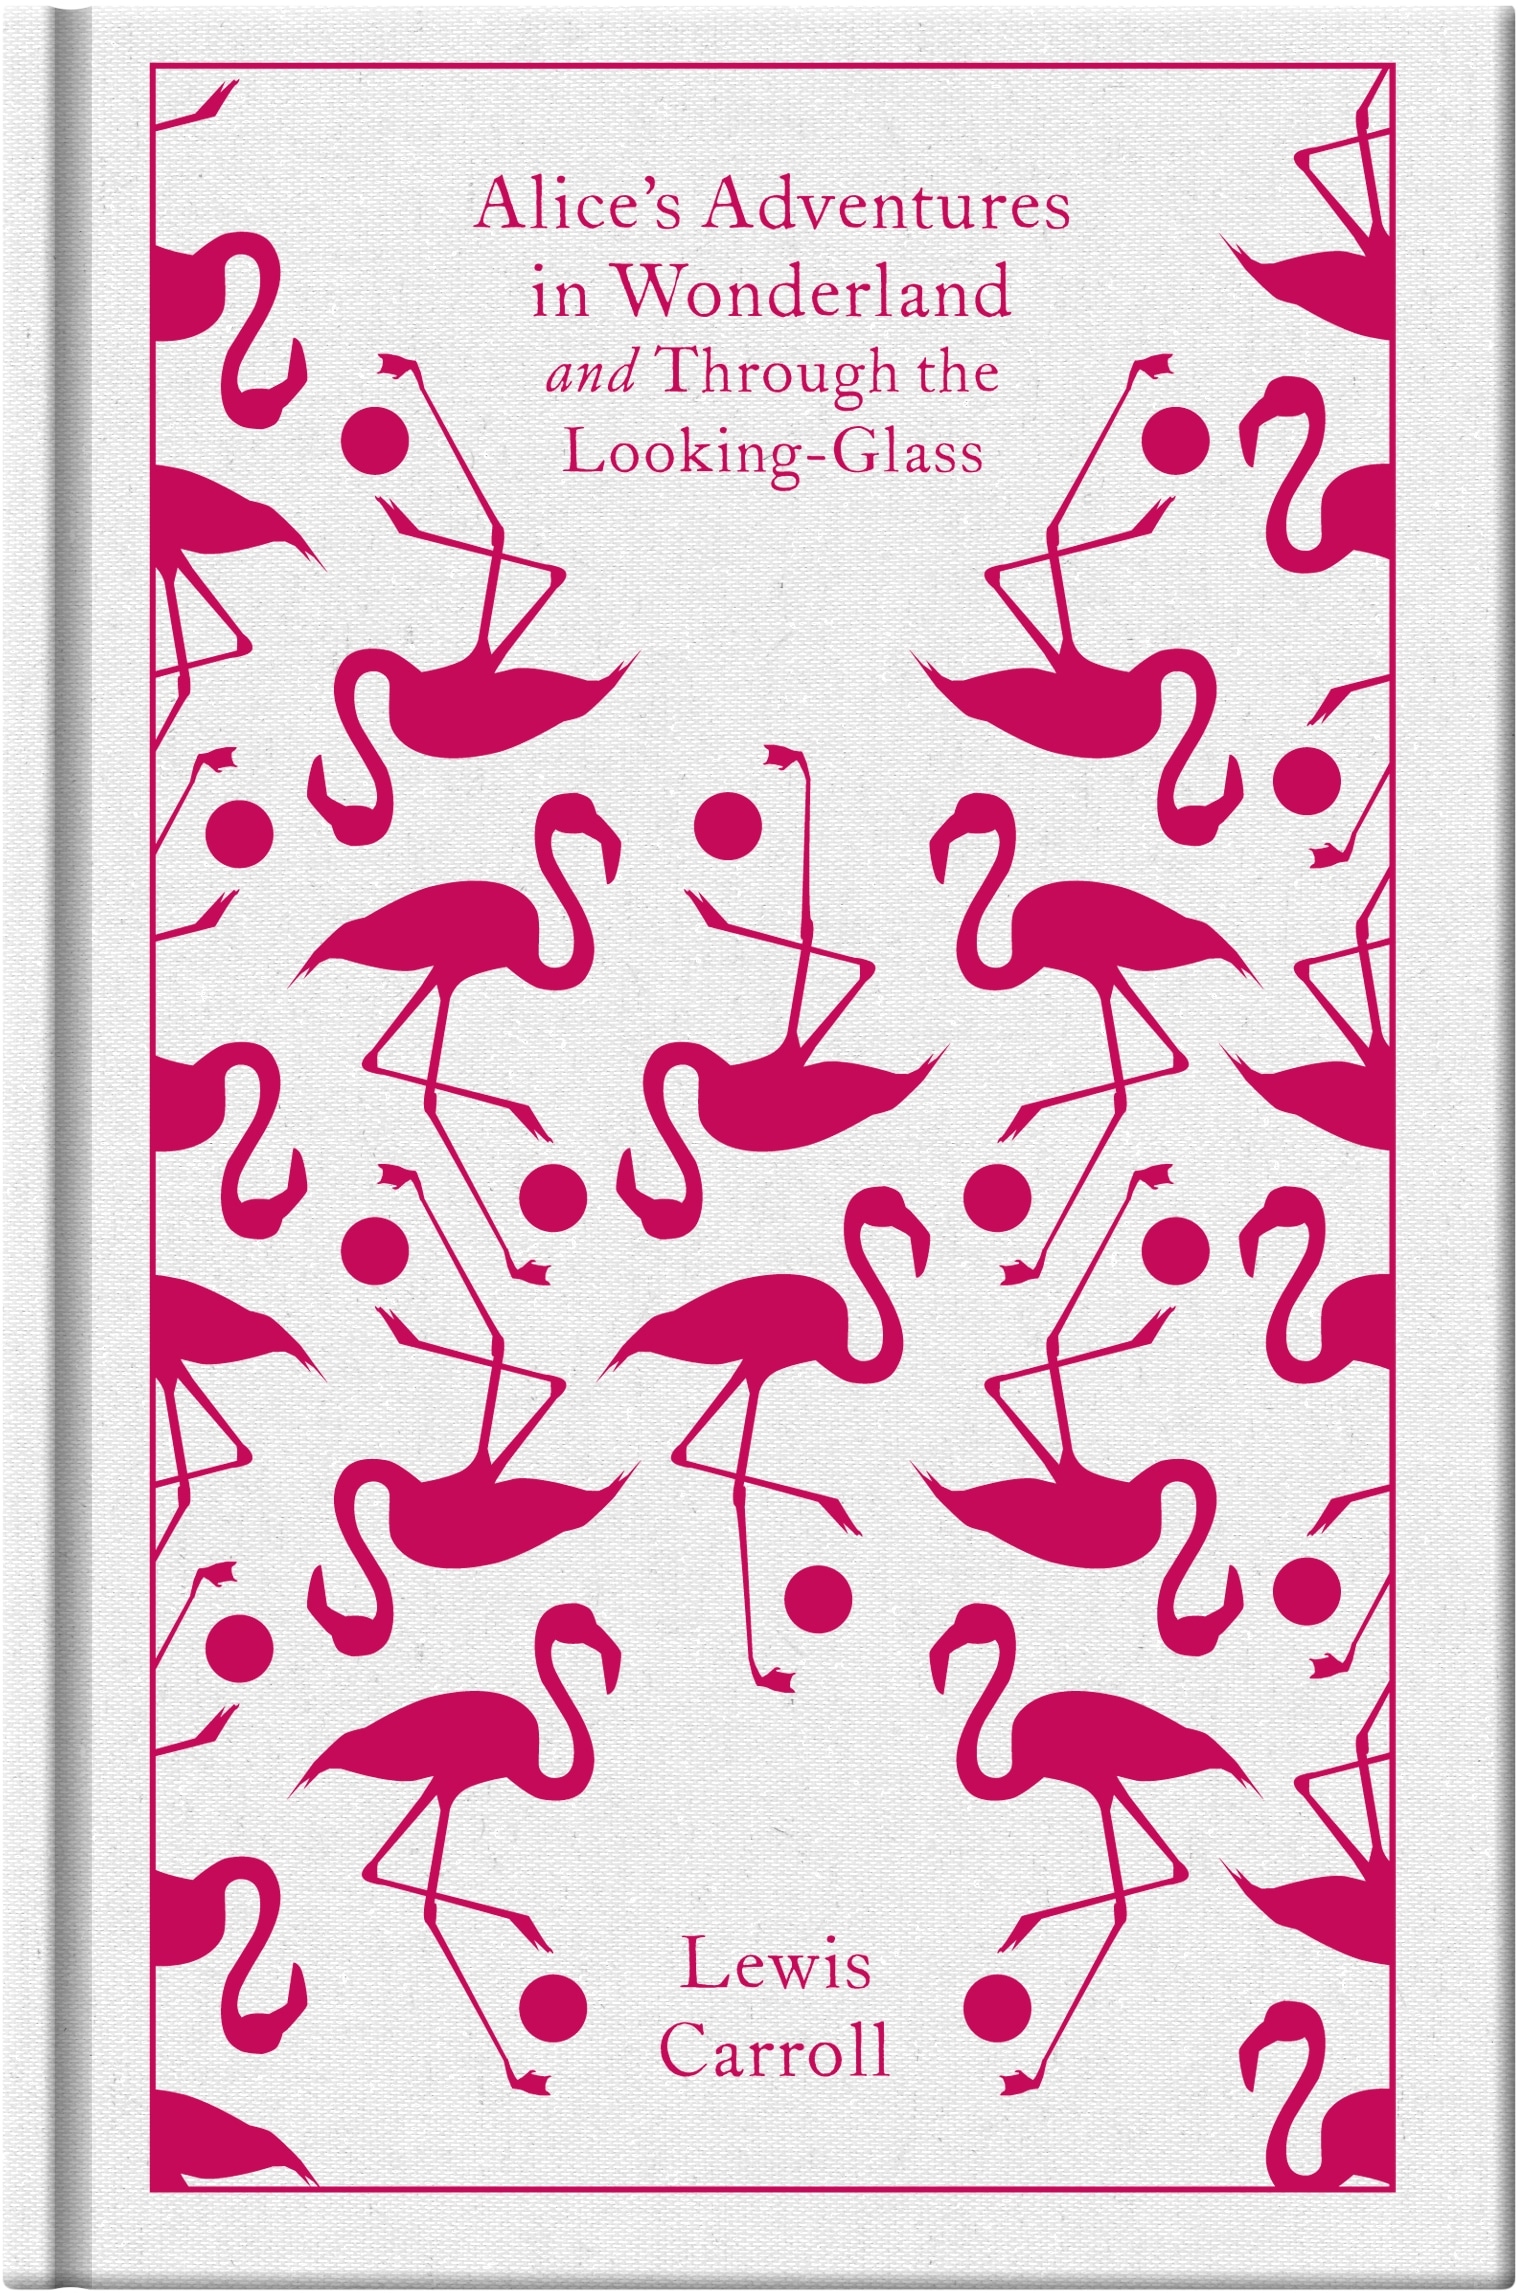 Book “Alice's Adventures in Wonderland and Through the Looking Glass” by Lewis Carroll — October 1, 2009